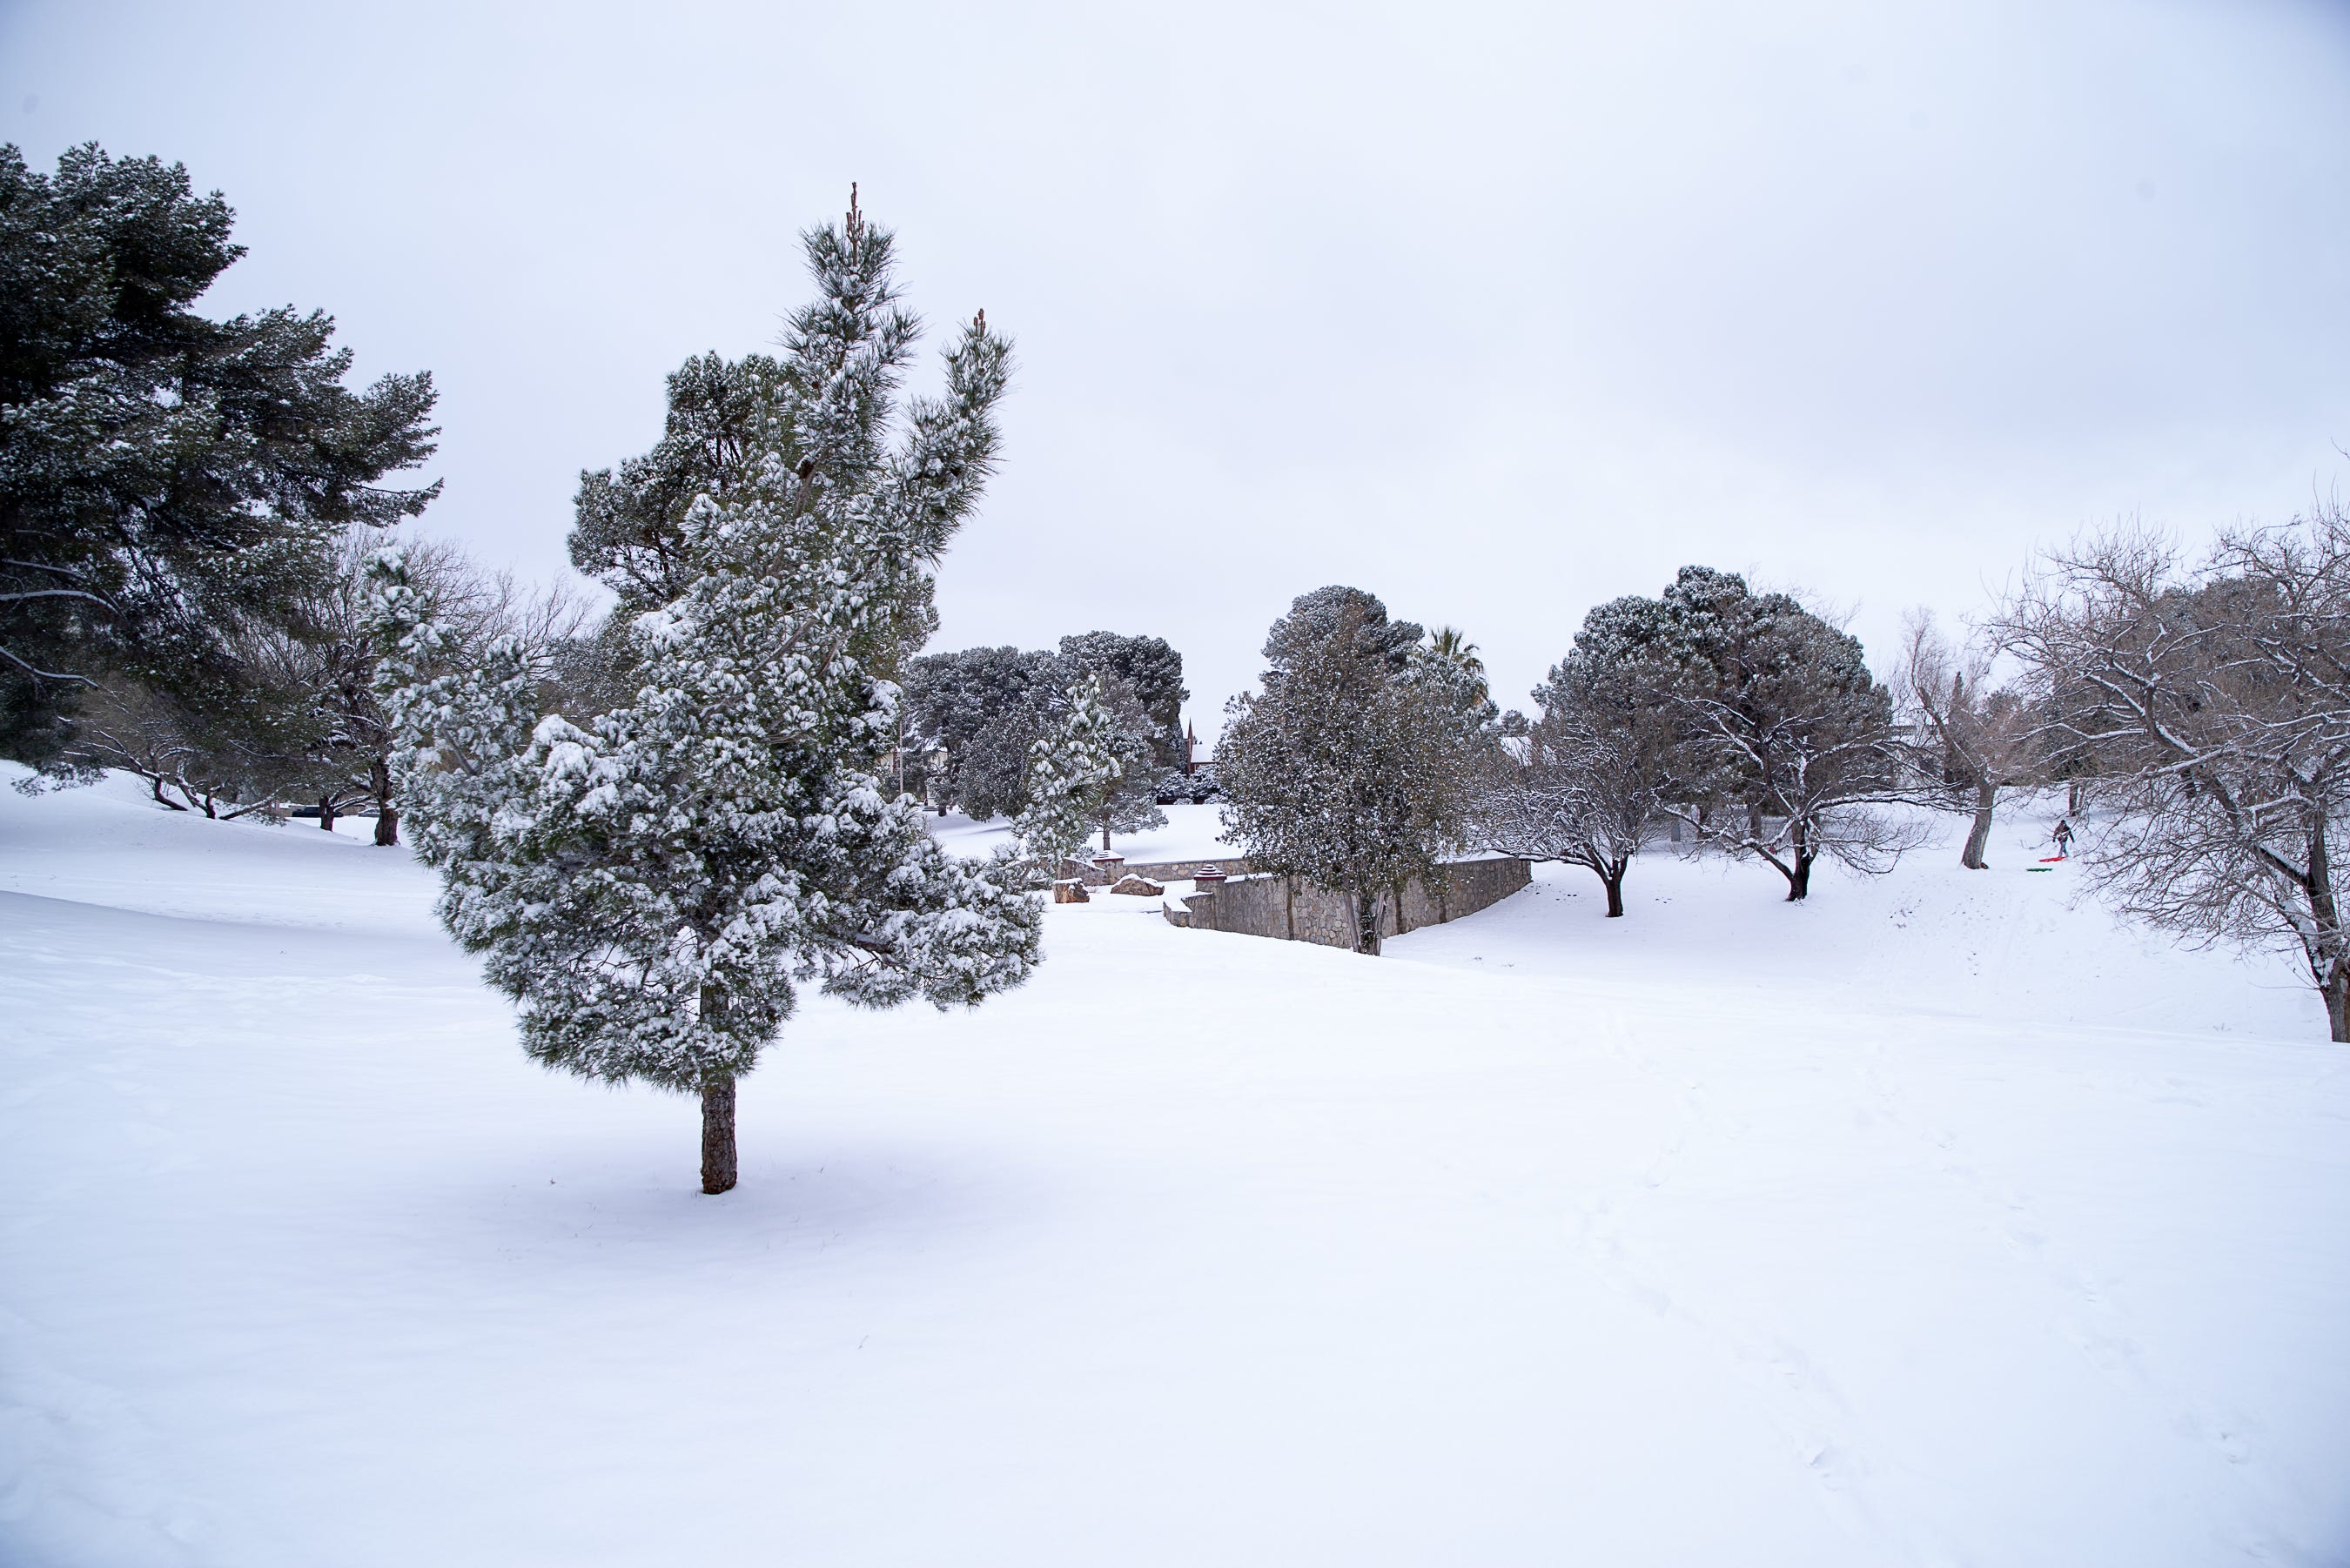 Memorial Park had a thick layer of snow on it on Sunday morning. Snow fell most of the day in El Paso on Valentine's Day. Feb. 14, 2021.